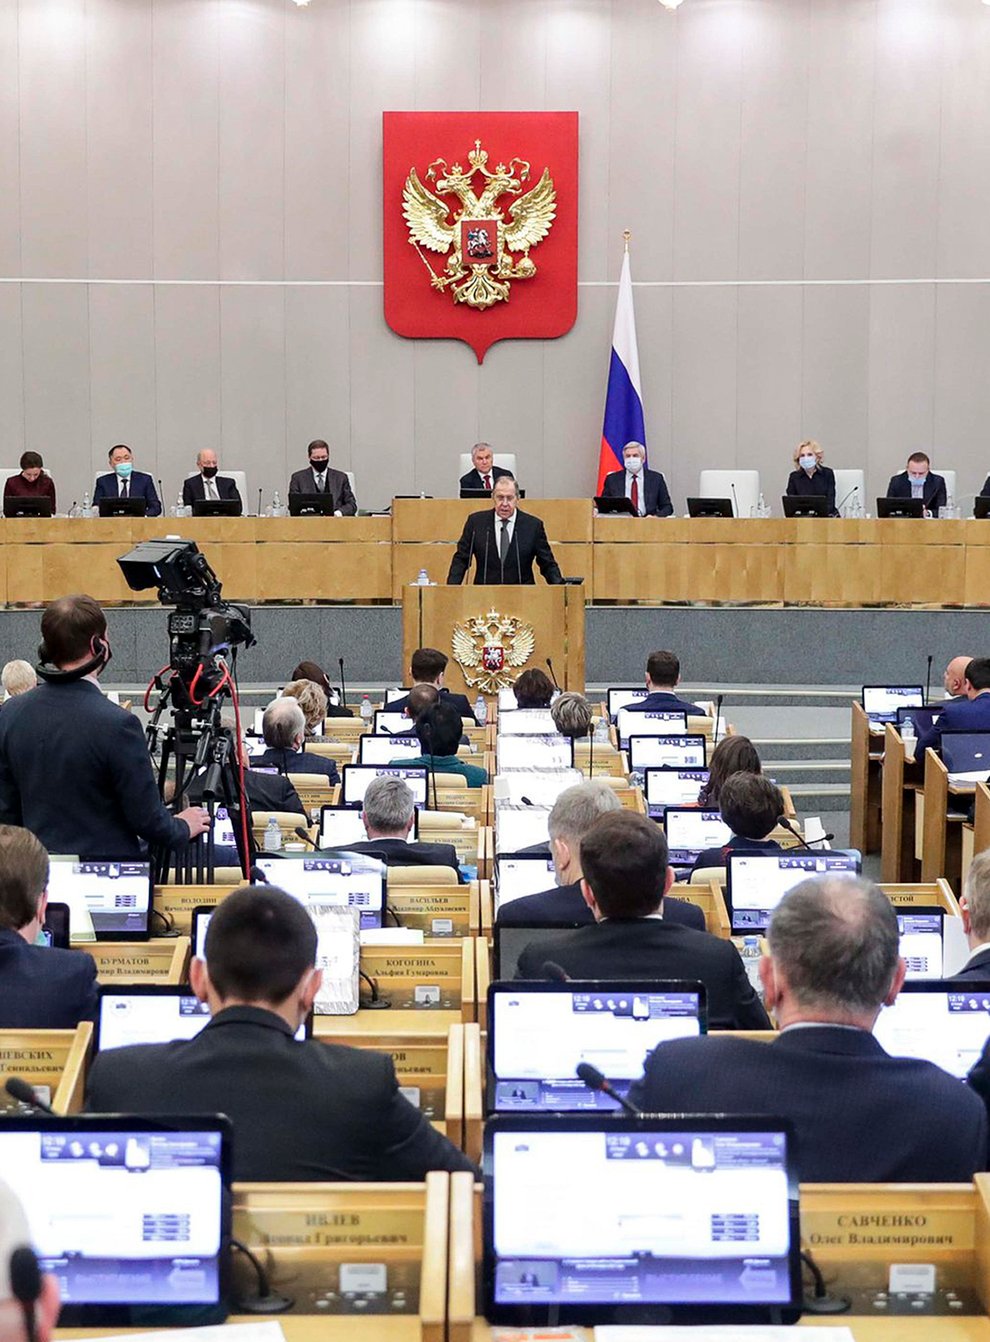 In this handout photo released by The State Duma, The Federal Assembly of The Russian Federation Press Service, Russian Foreign Minister Sergey Lavrov addresses the State Duma, the Lower House of the Russian Parliament in Moscow, Russia, Wednesday, Jan. 26, 2022. Lavrov said he and other top officials will advise President Vladimir Putin on the next steps after receiving written replies from the United States to the demands. Those answers are expected this week — even though the U.S. and its allies have already made clear they will reject the top Russian demands. (The State Duma, The Federal Assembly of The Russian Federation Press Service via AP)